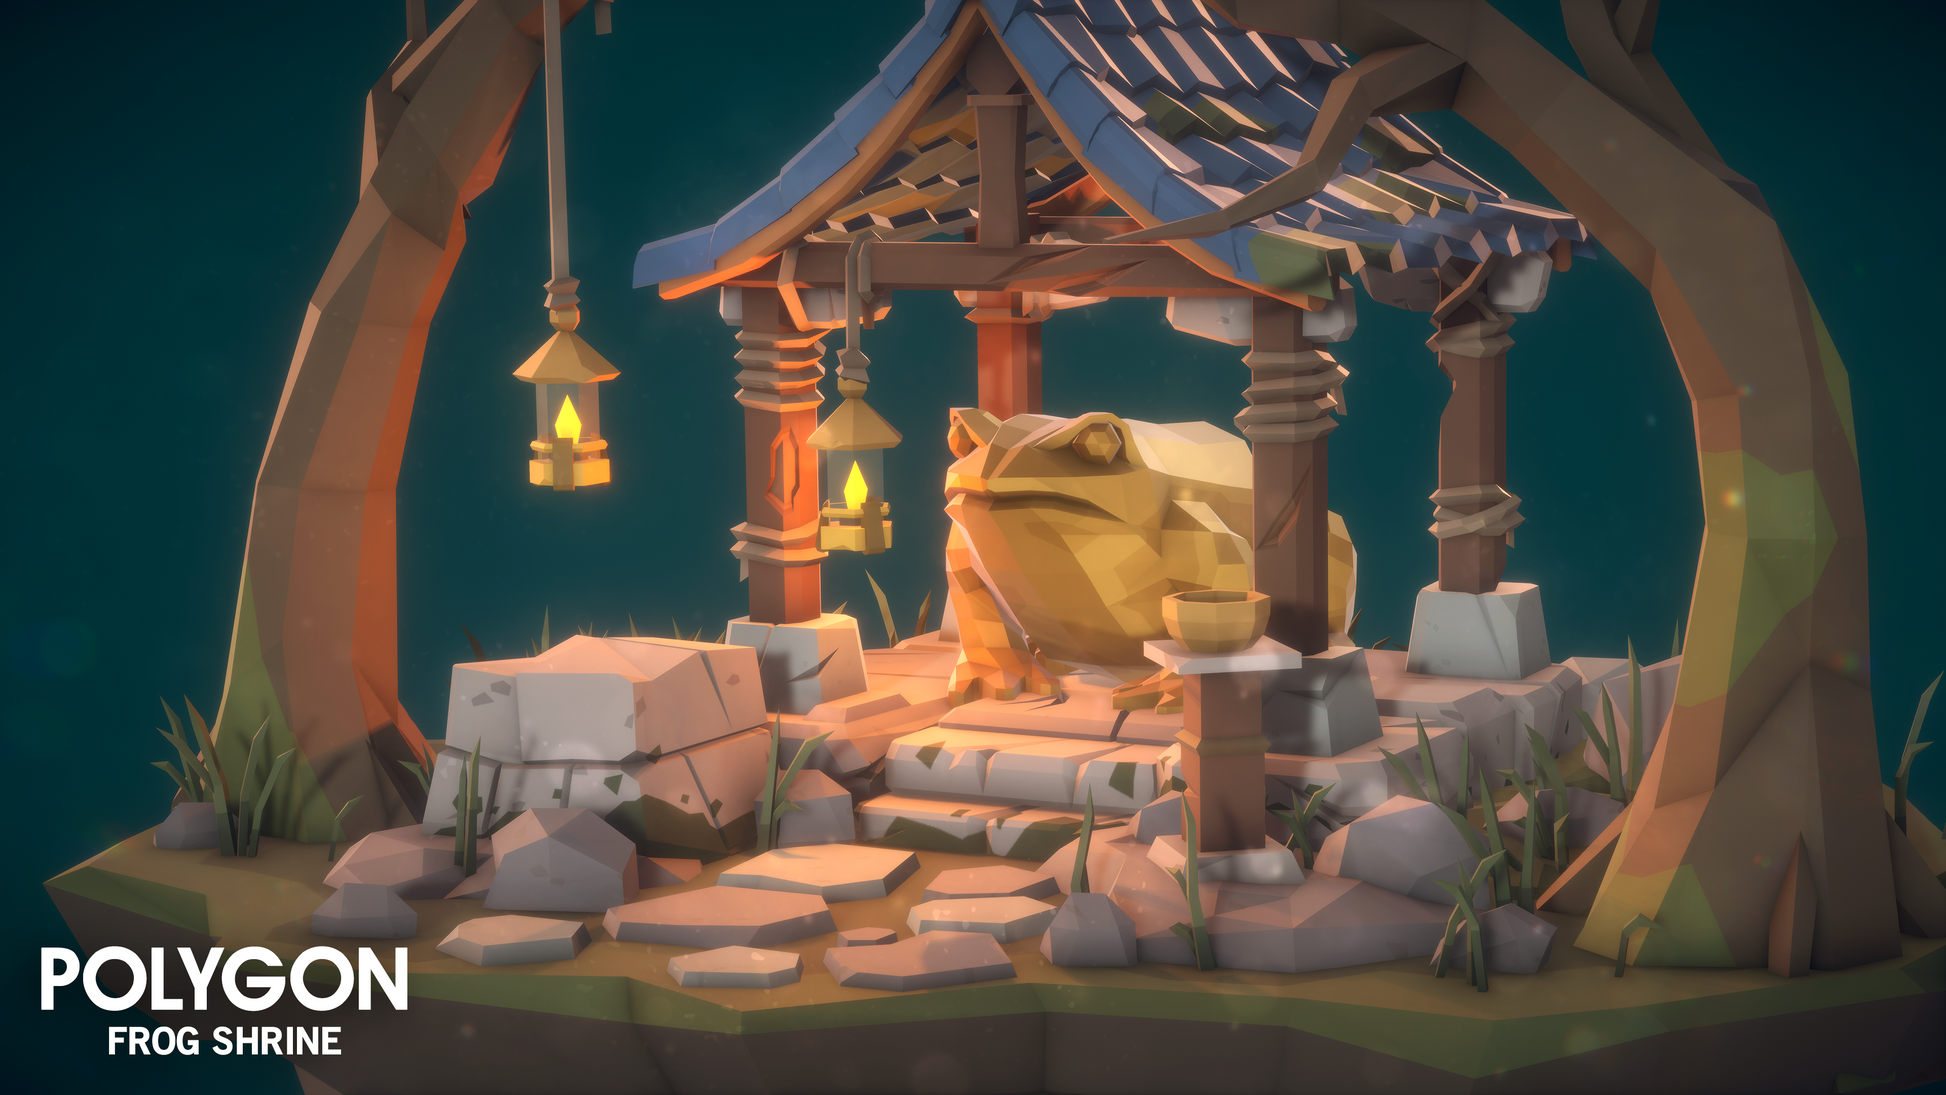 Close up view of the POLYGON Frog Shrine game asset